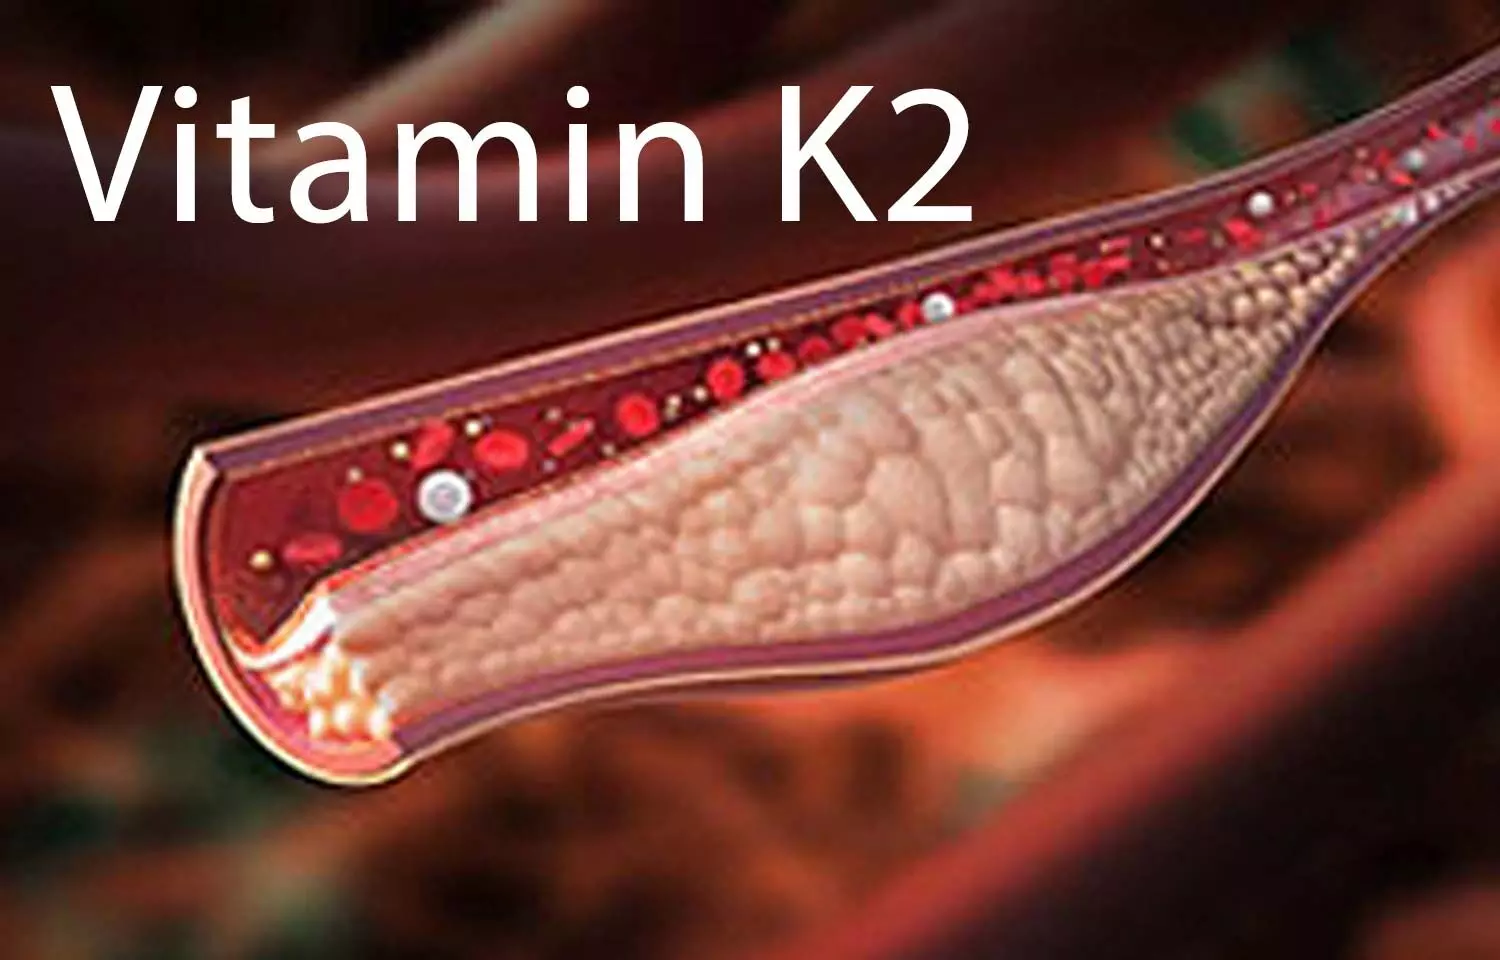 Role of Vitamin K2 in managing vascular calcification: Review